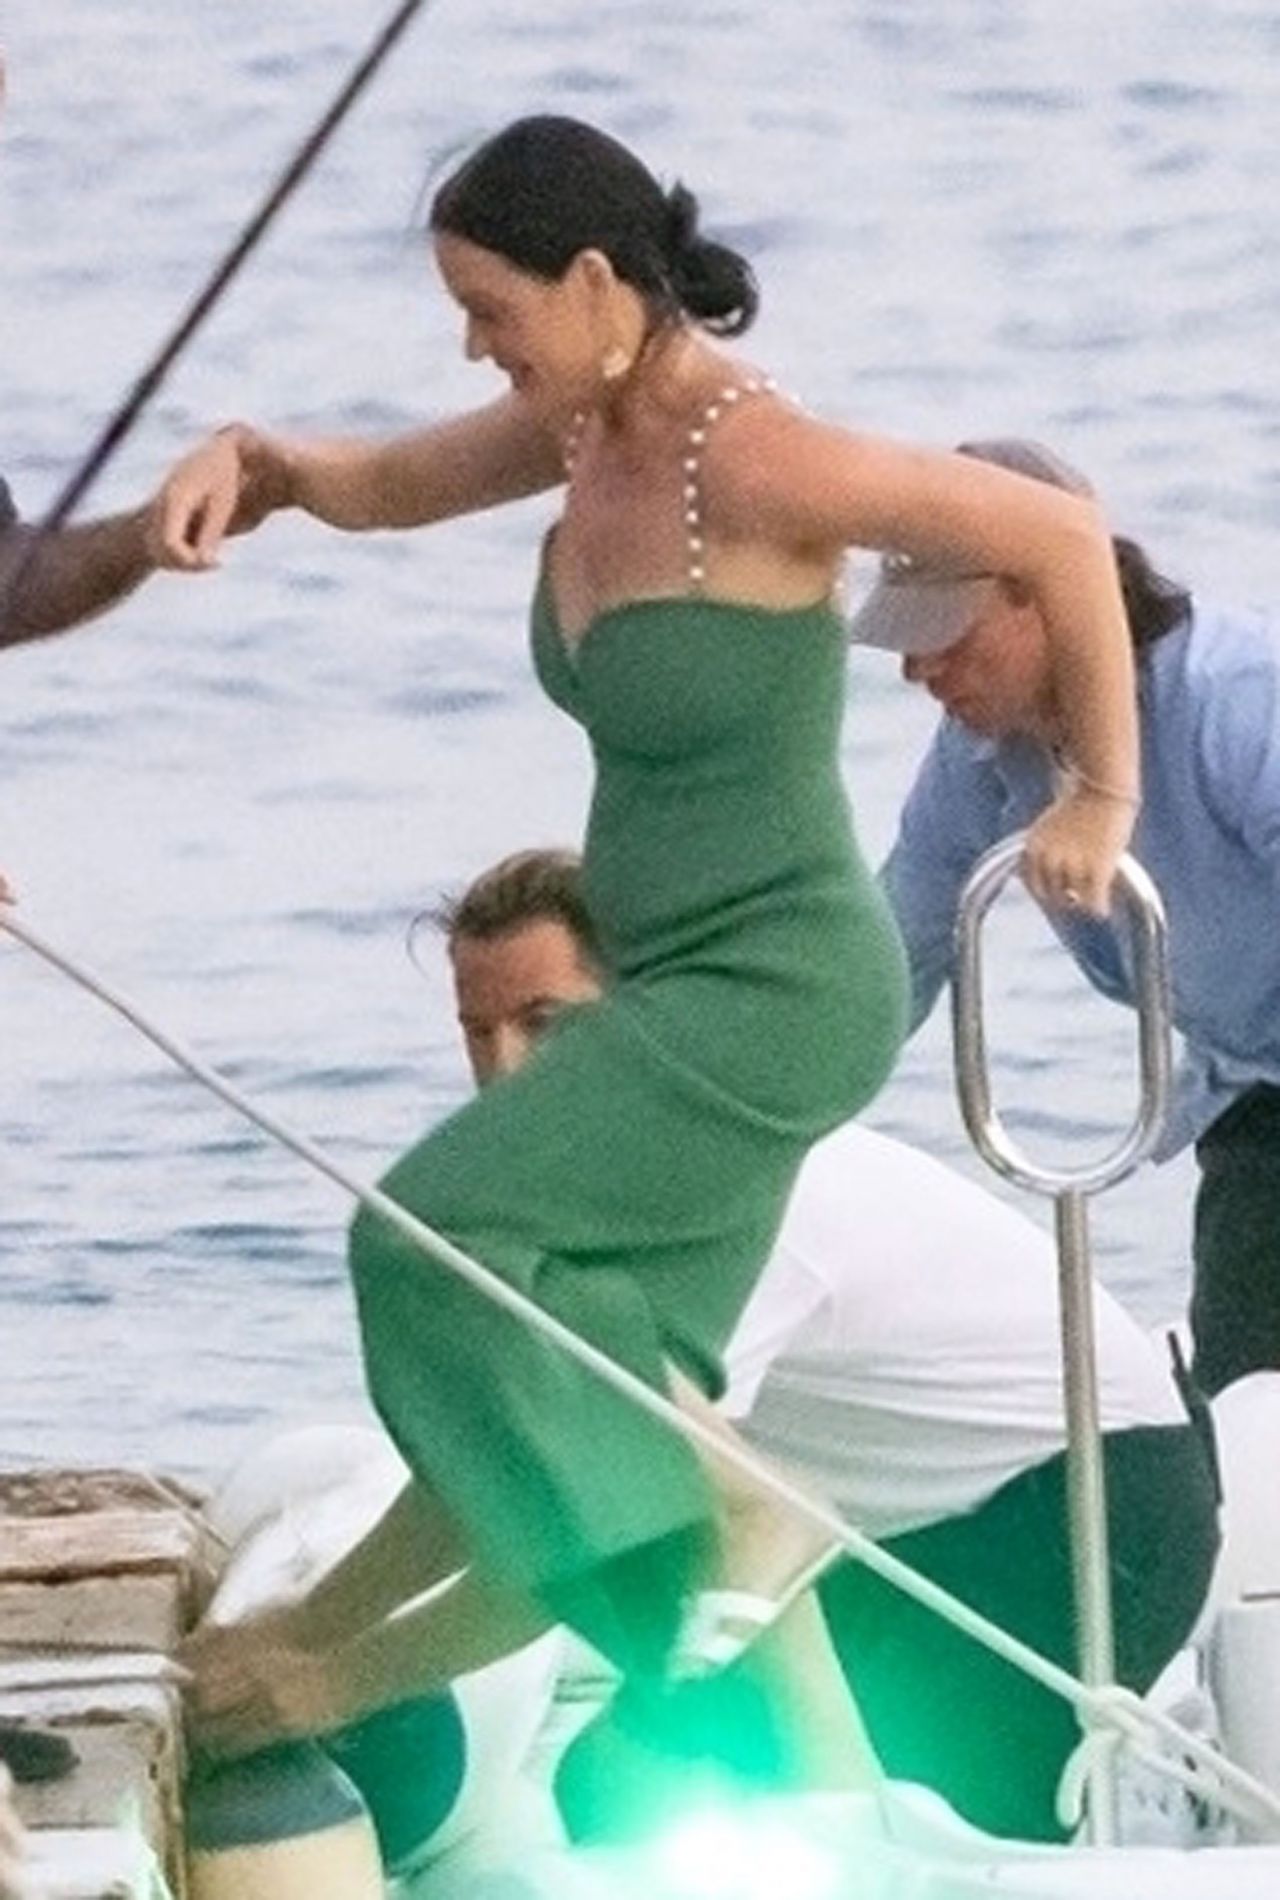 Katy Perry in an Emerald Green Dress in Nerano 08/24/2022.